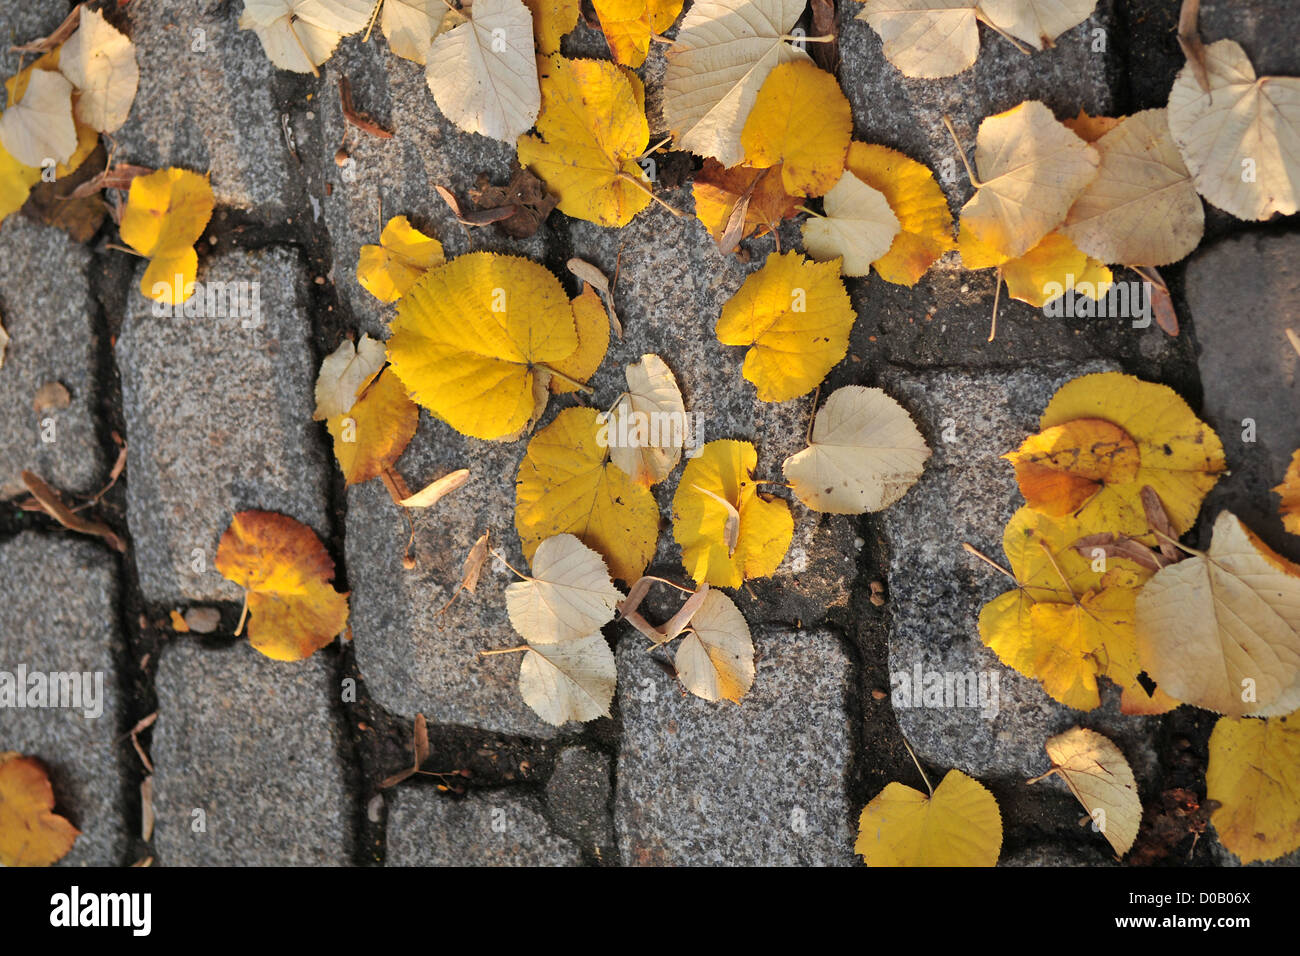 DEAD LEAVES ON THE PAVEMENT THE COMING OF AUTUMN Stock Photo